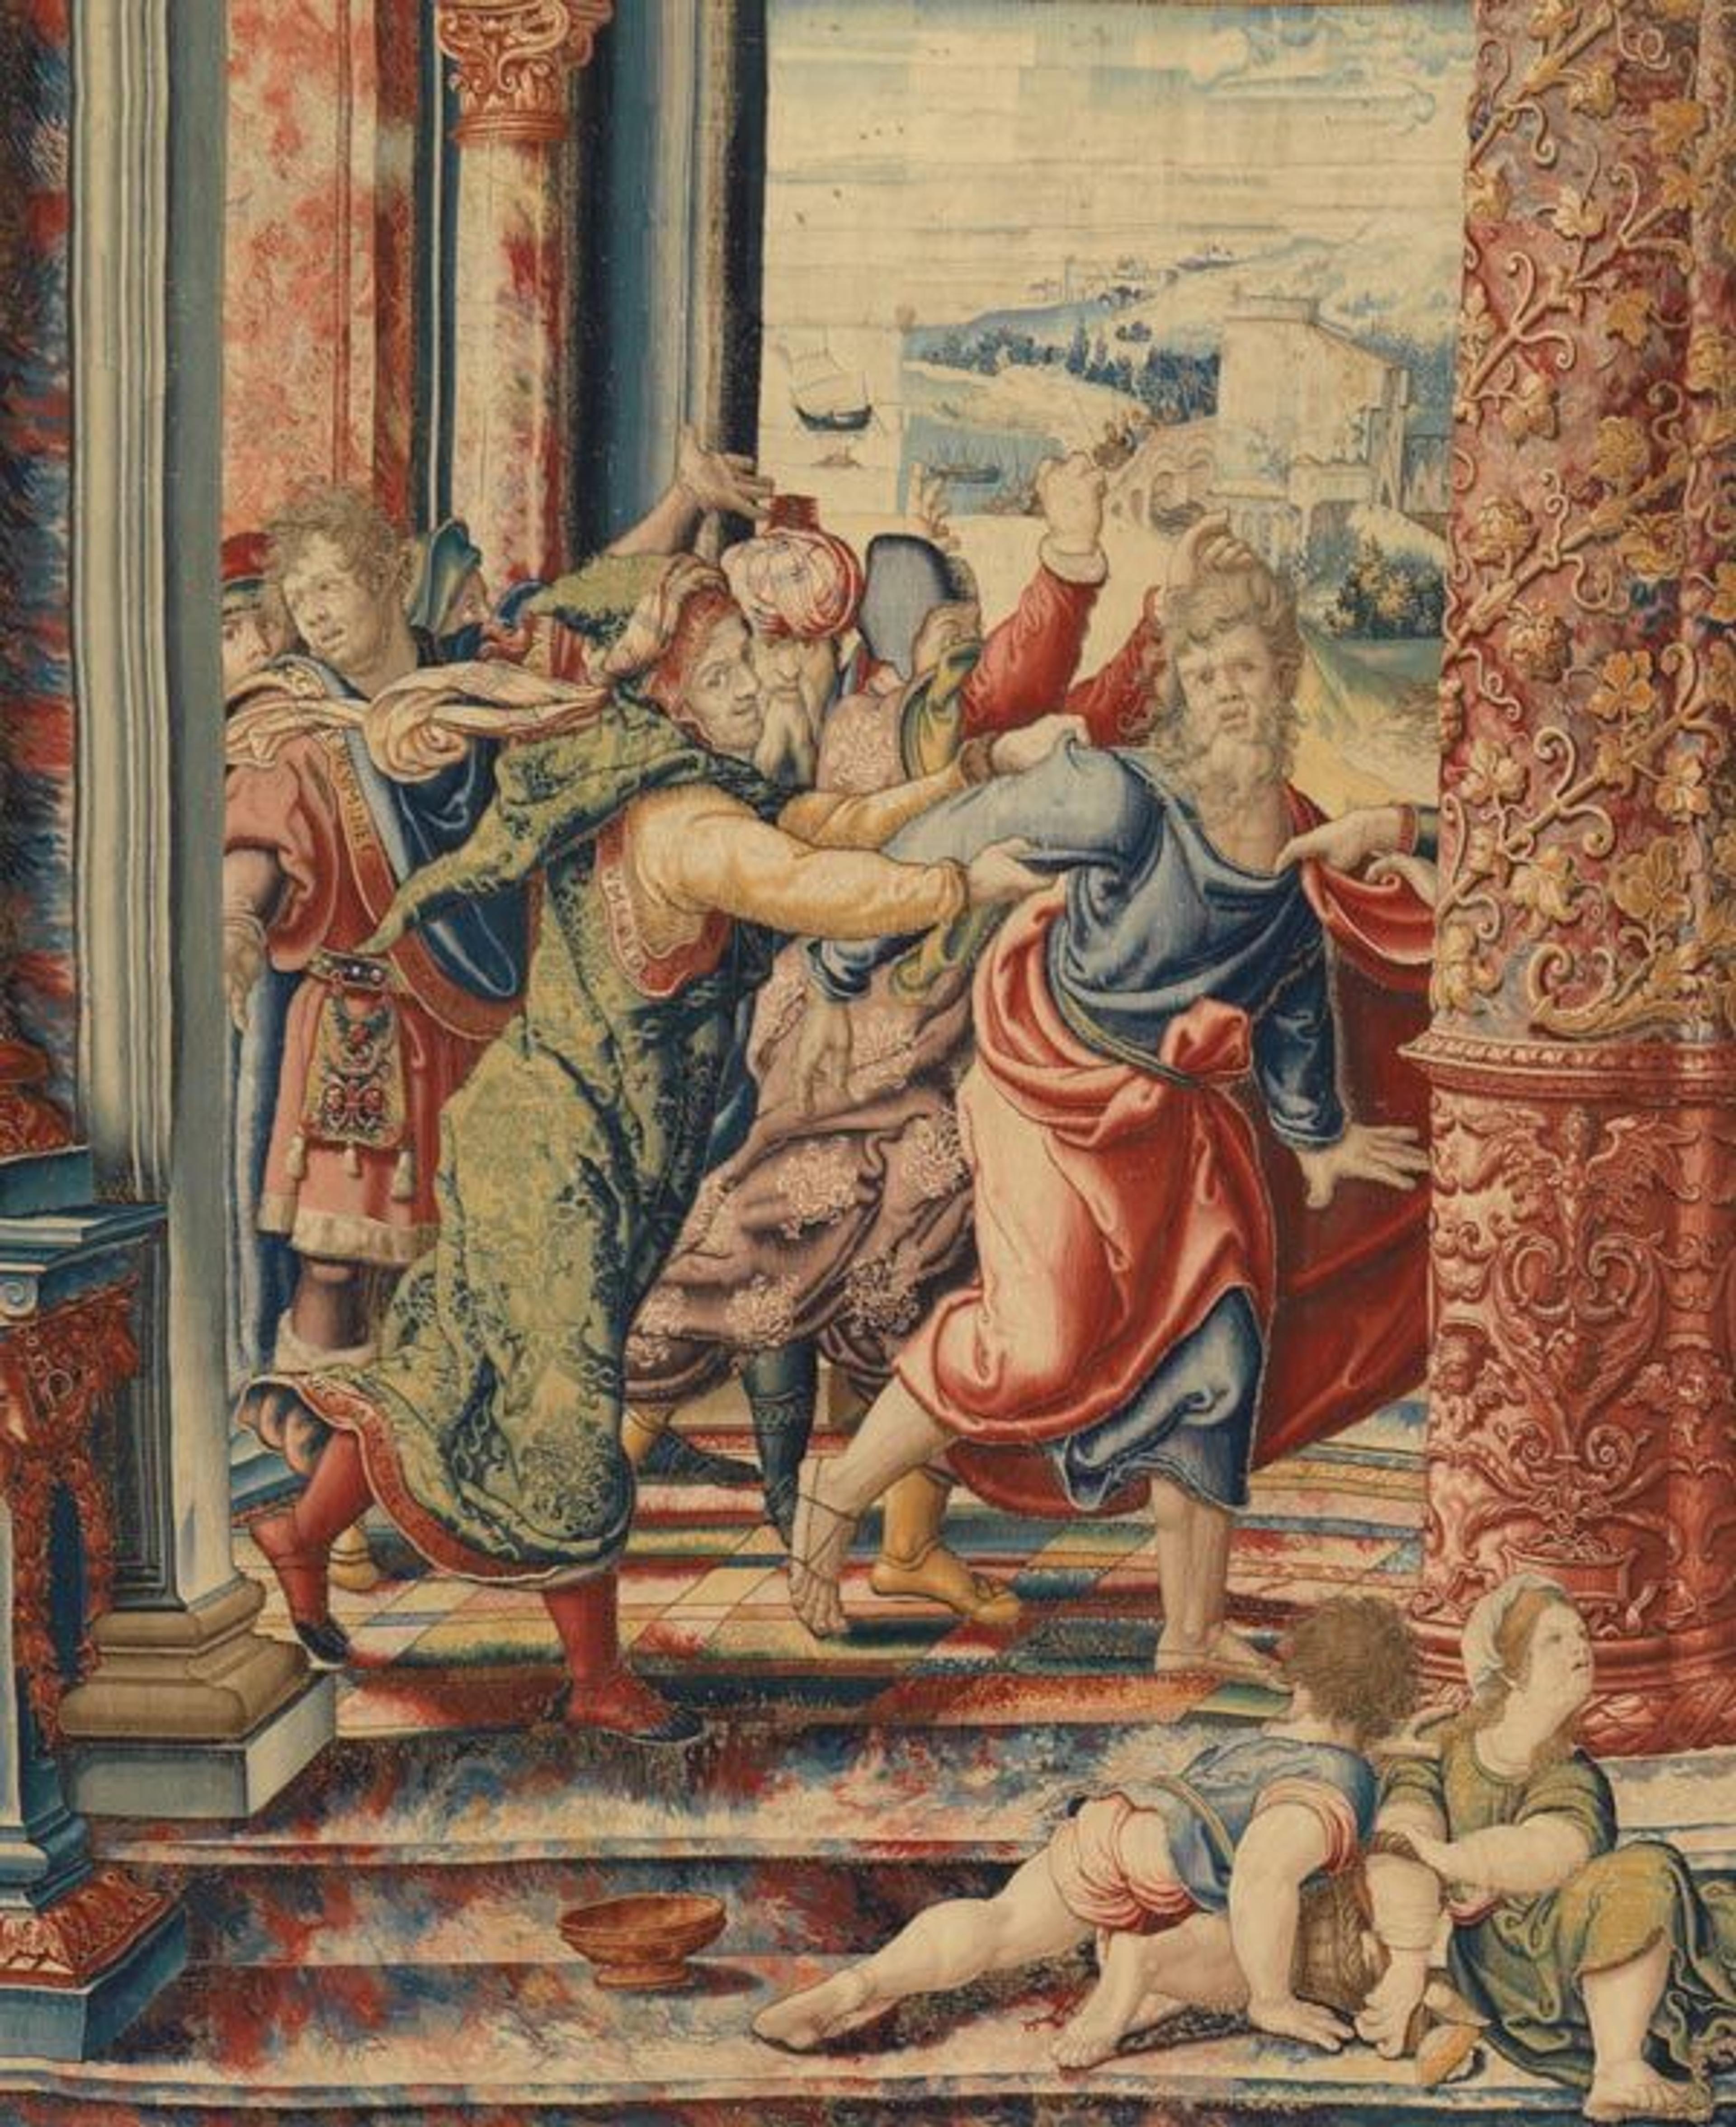 Saint Paul Seized at the Temple of Jerusalem tapestry in a set of the Life of Saint Paul (detail). Designed by Pieter Coecke van Aelst (Netherlandish, 1502–1550), ca. 1529–30. Probably woven under the direction of Jan van der Vyst, Brussels, probably before 1546. Wool and silk; 13 ft. 10 1/8 in. x 26 ft. 6 1/8 in. (422 x 808 cm). KBC Bank Collection, Leuven